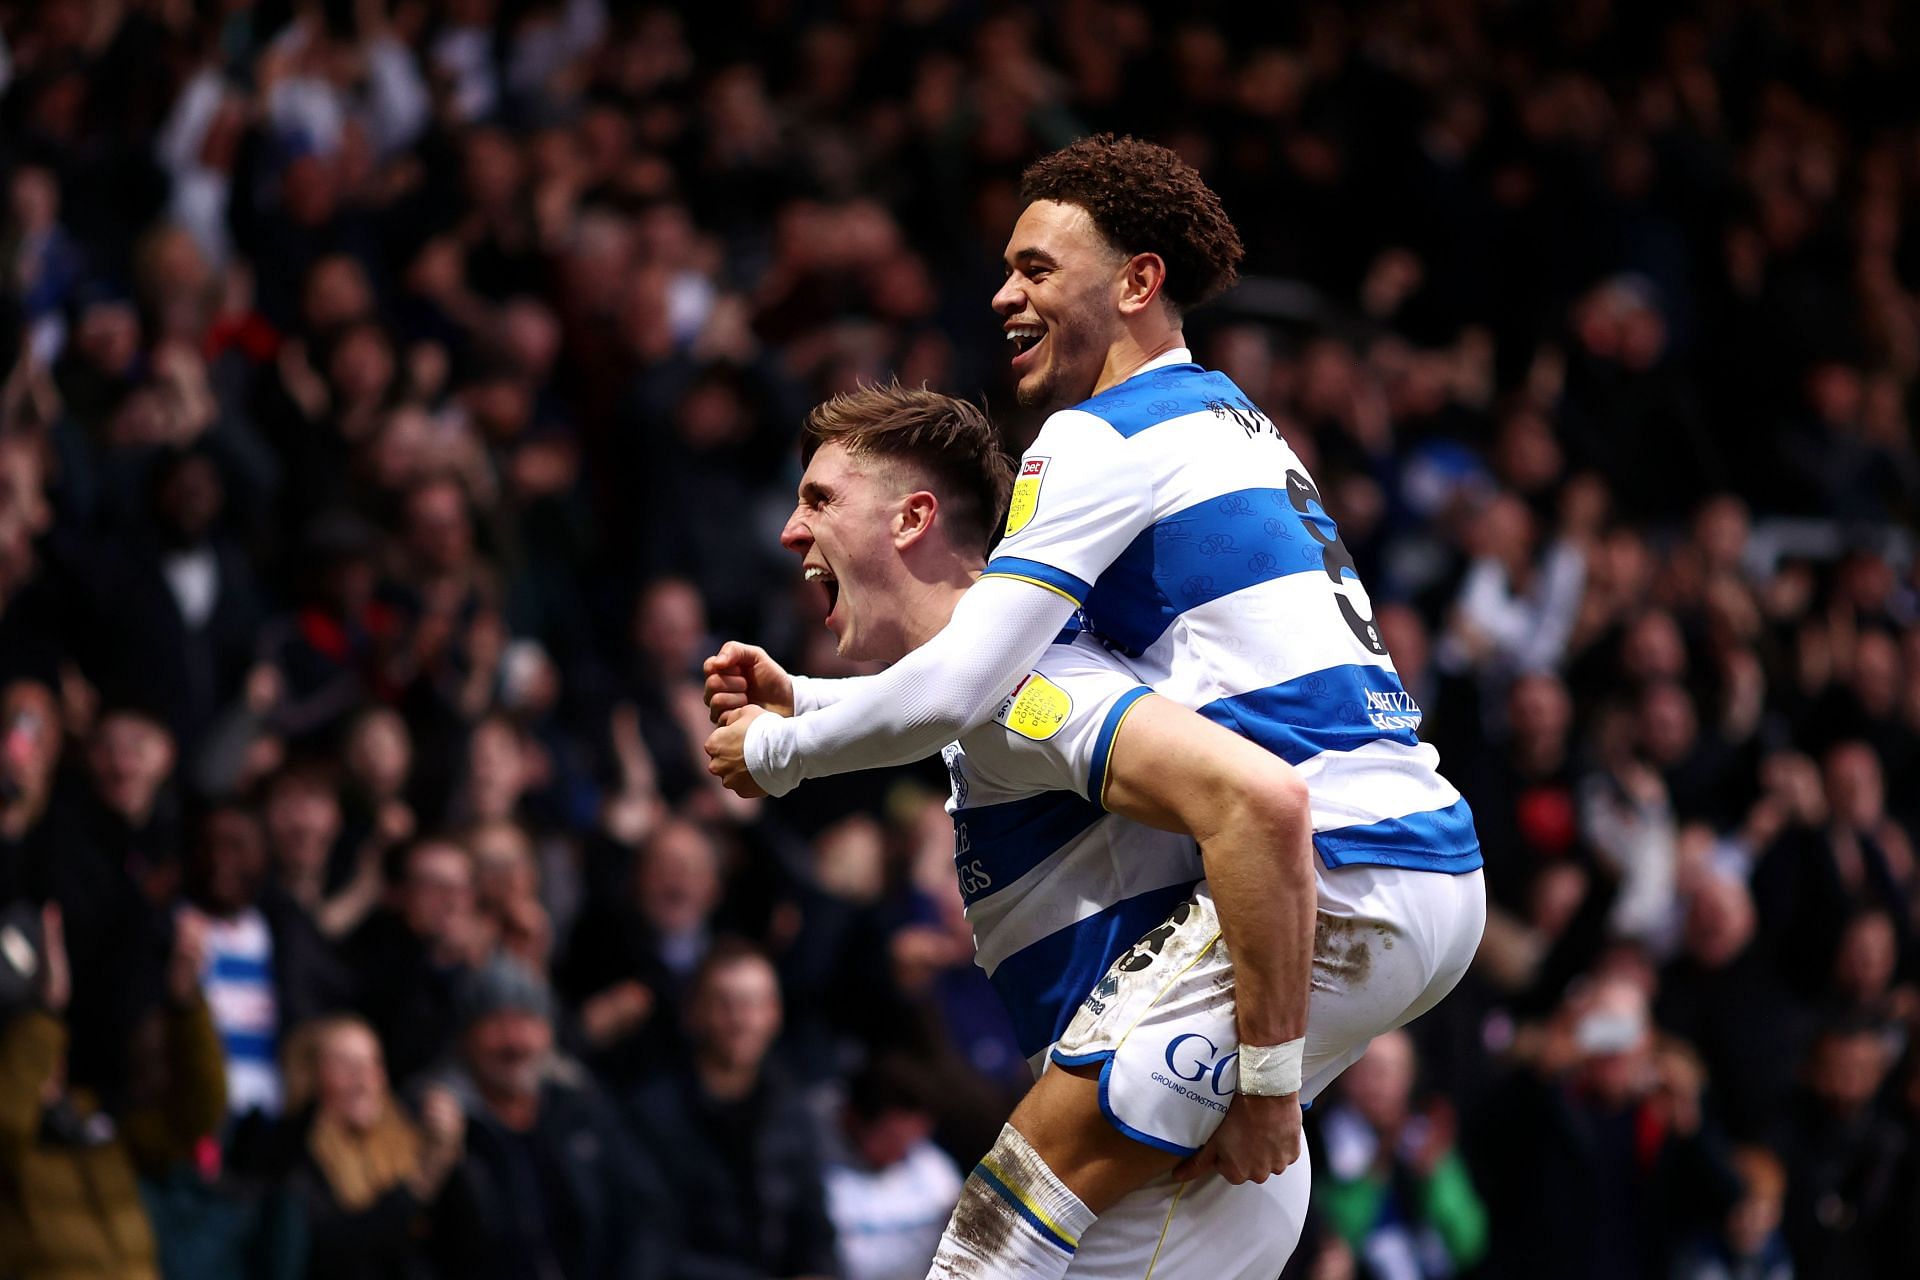 QPR are looking to advance to the next round